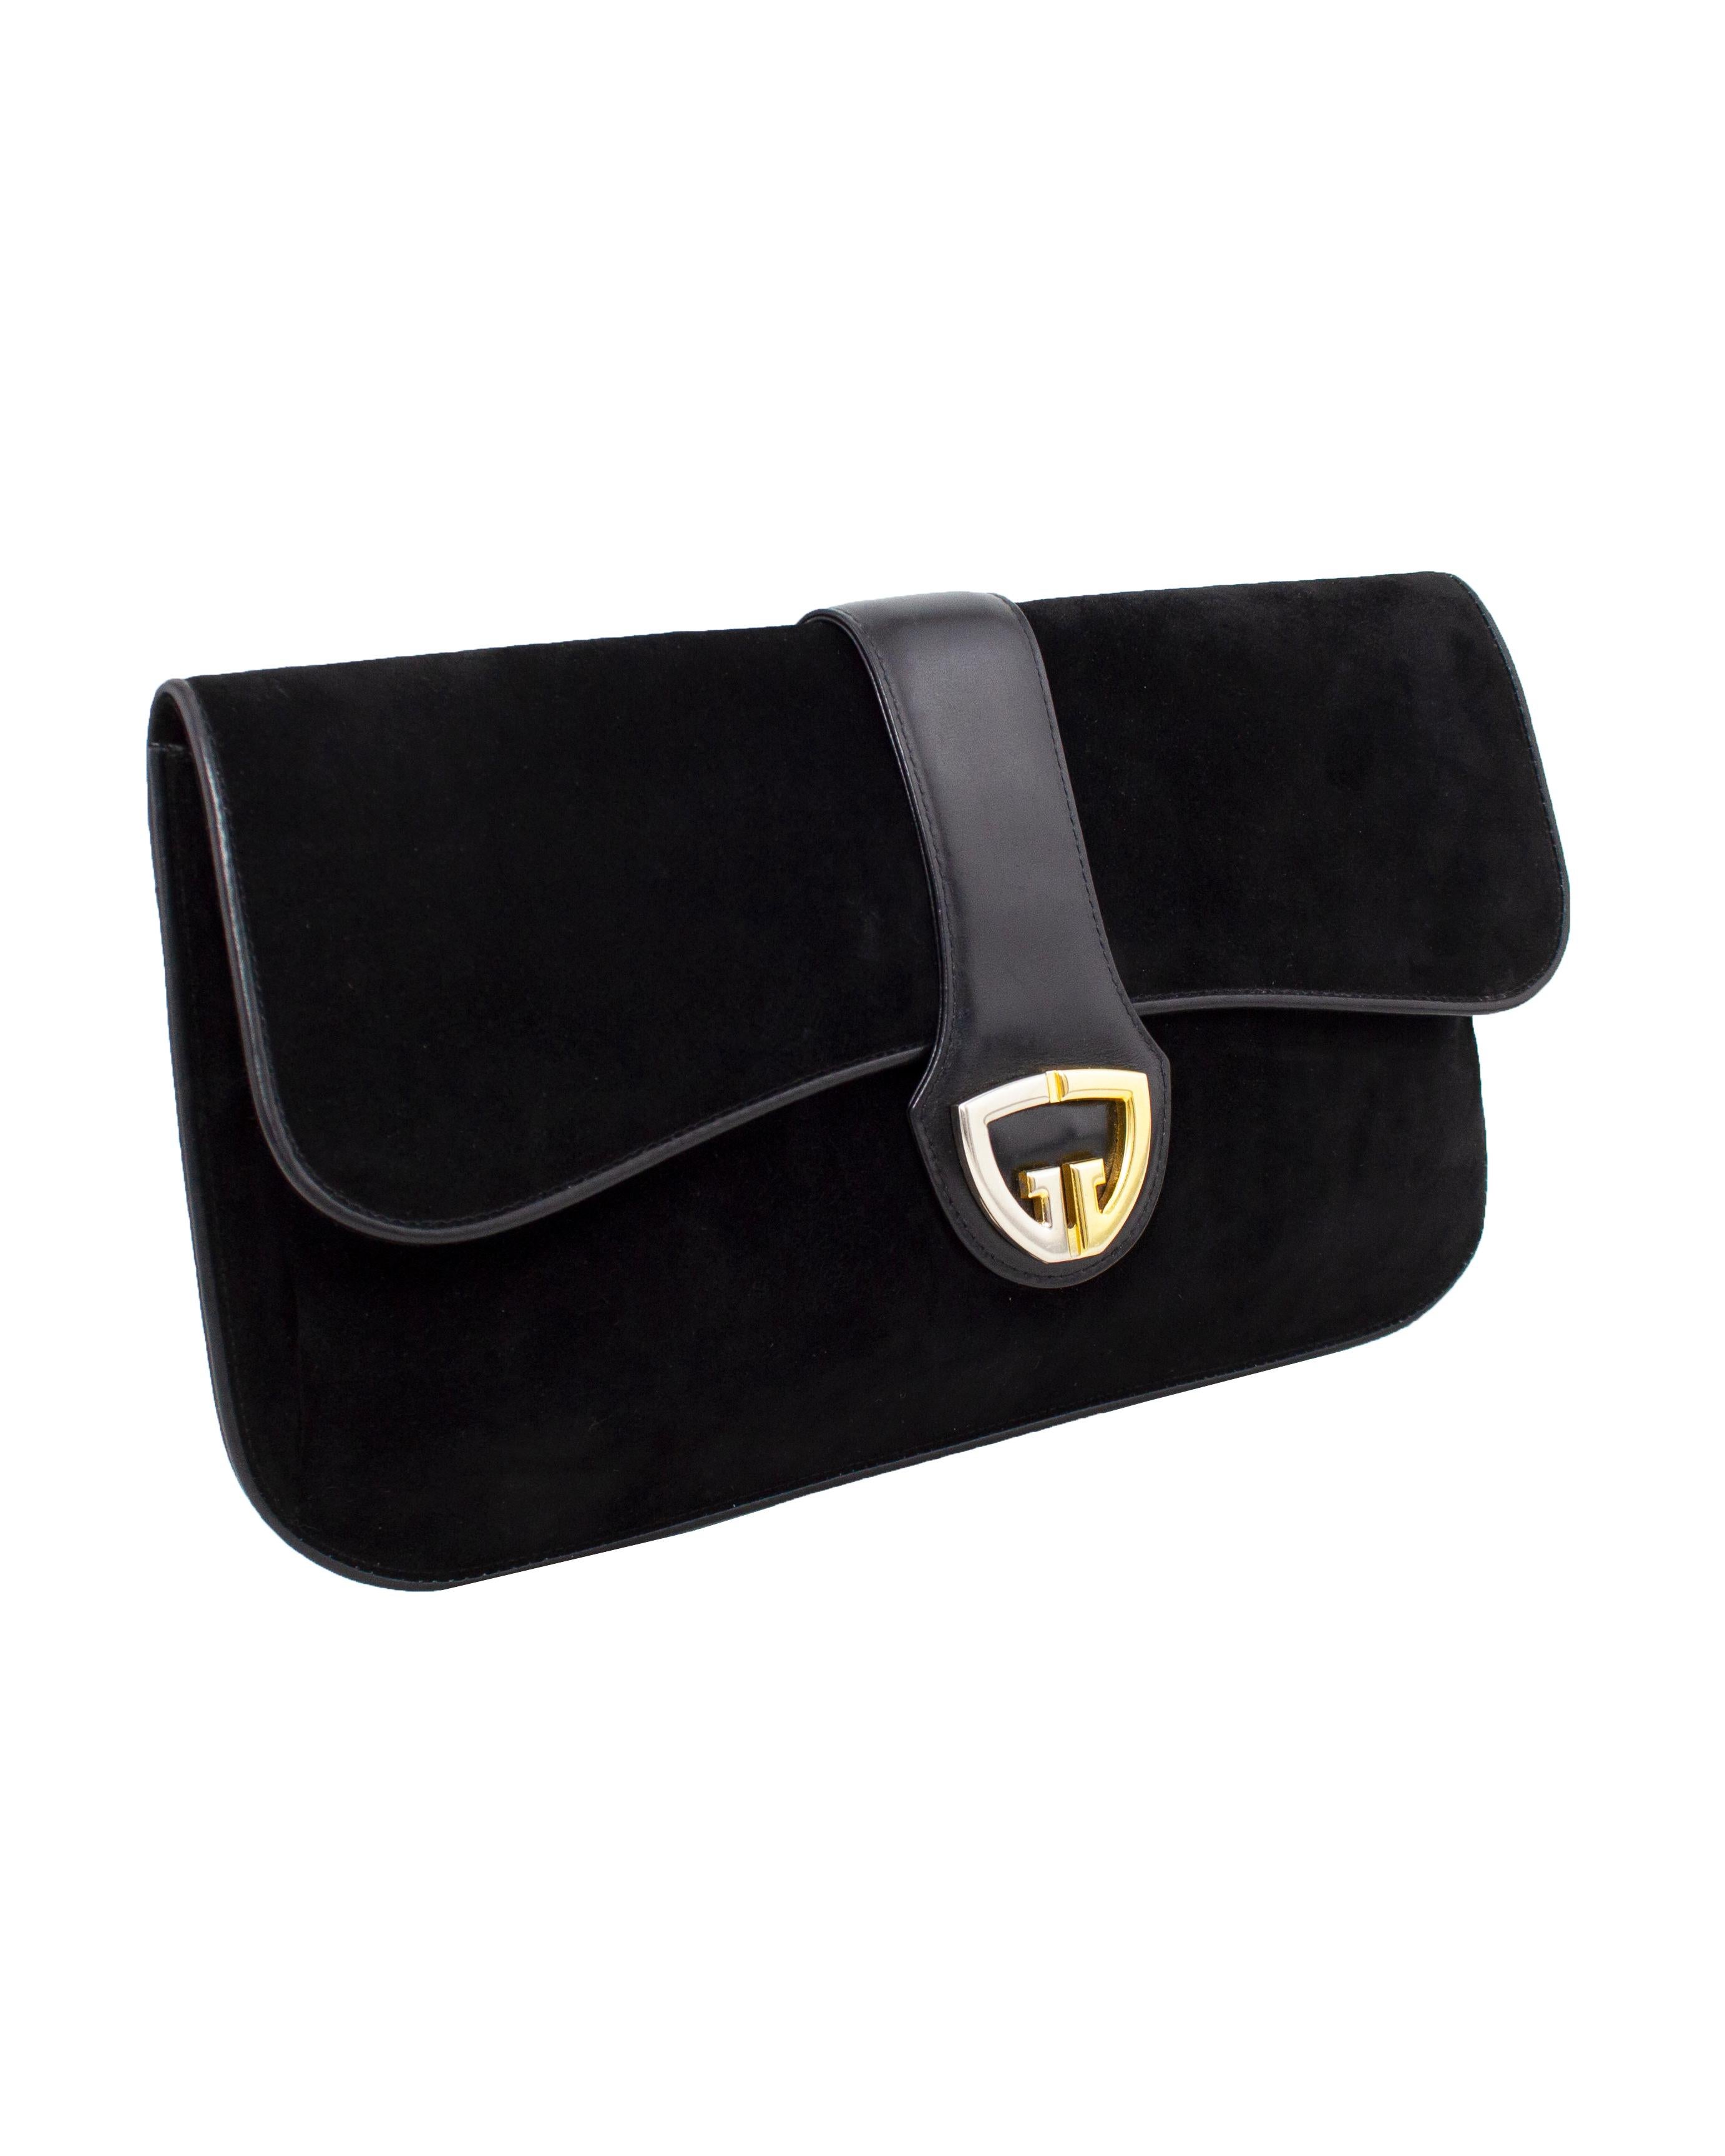 Fabulous Gucci large black suede and leather clutch from the 1970s. Envelope style with a flap opening. Contrasting silver and gold tone metal G logo at centre of bag with a magnetic snap closure. Clean black leather interior with large single